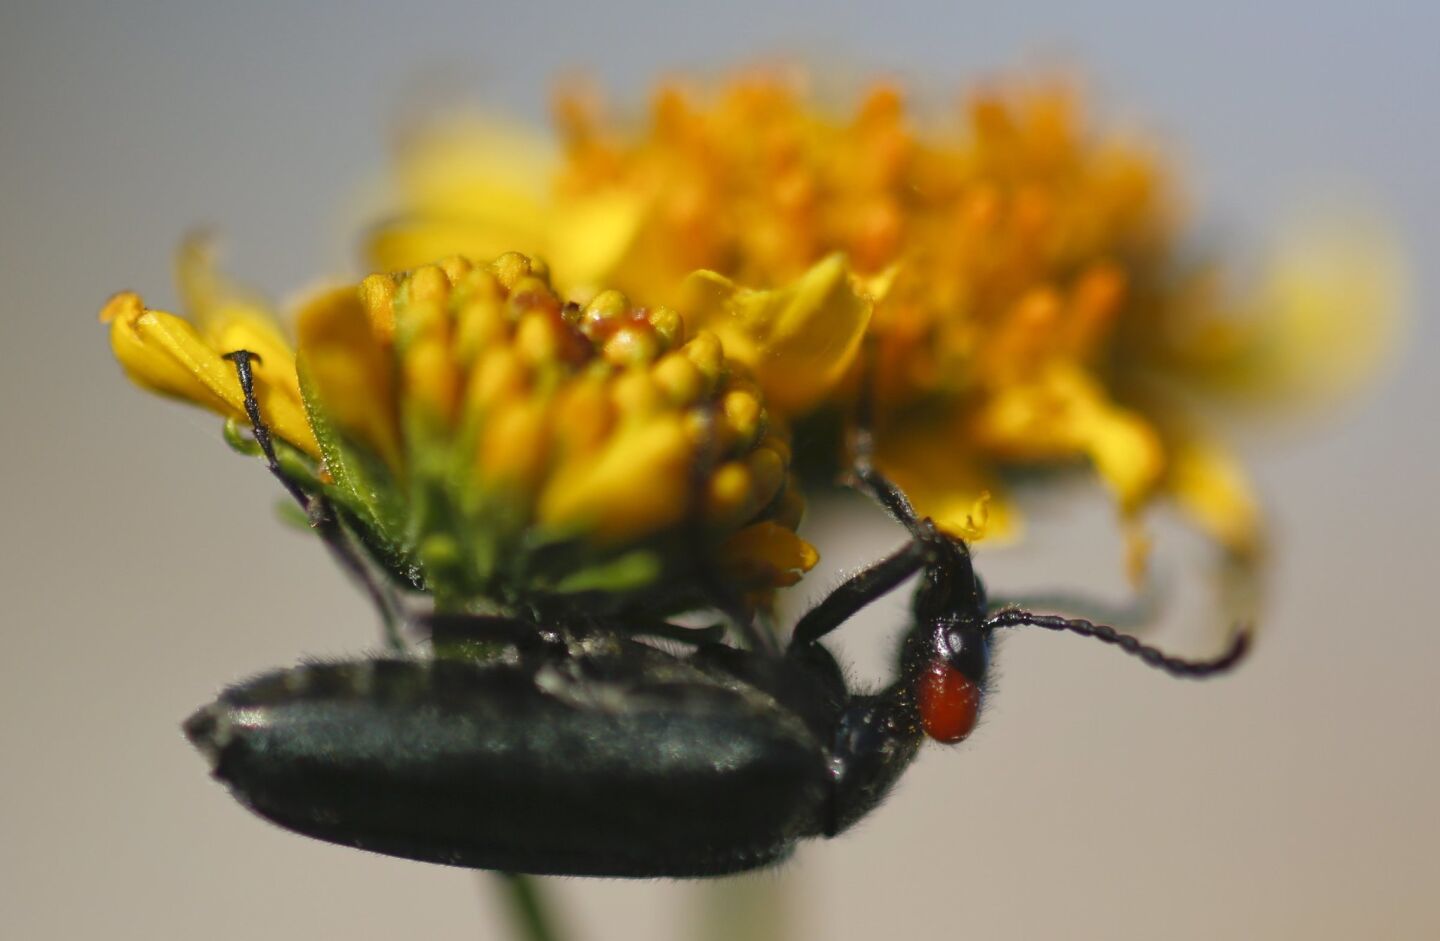 A blister beetle nibbles on a brittle bush flower found in the Glorietta Canyon area of Anza Borrego Desert State Park.